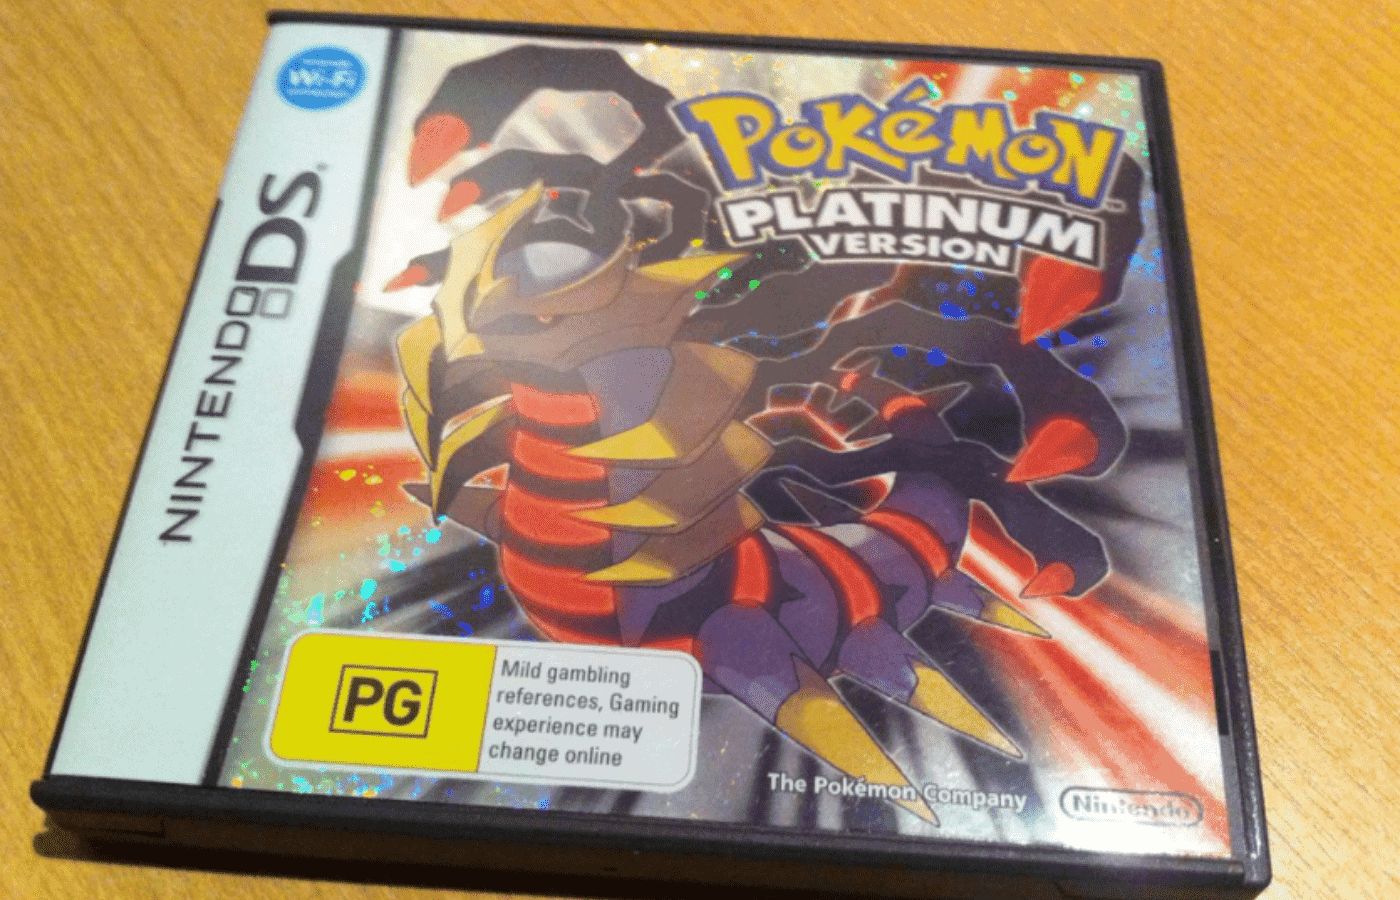 Why Is Pokemon Platinum So Expensive (Rare)